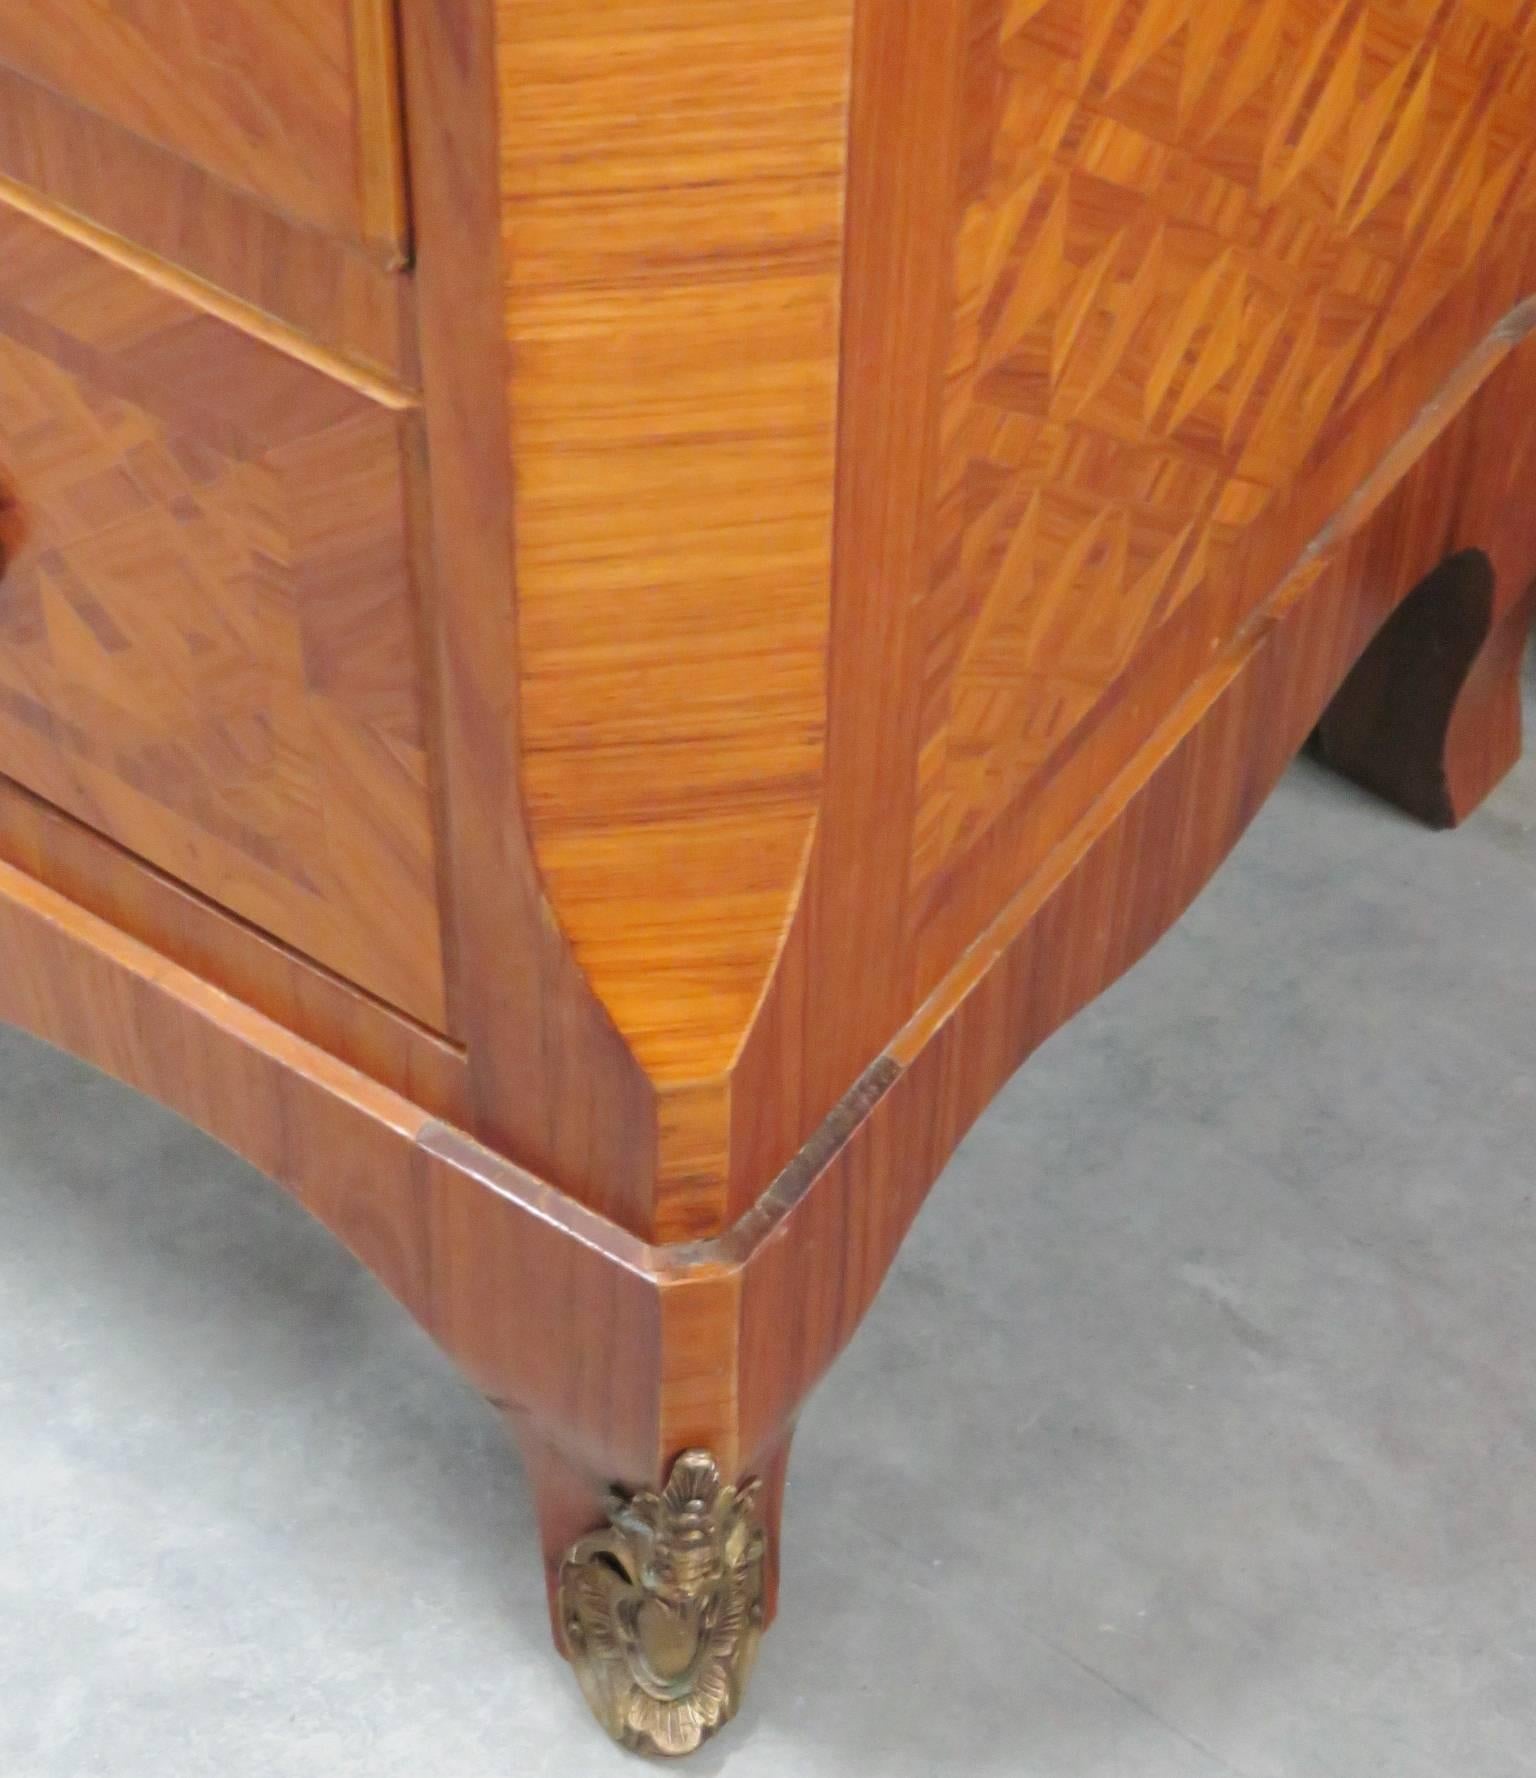 Marble-top. Parquetry inlaid frame. Bronze mounts and hardware.